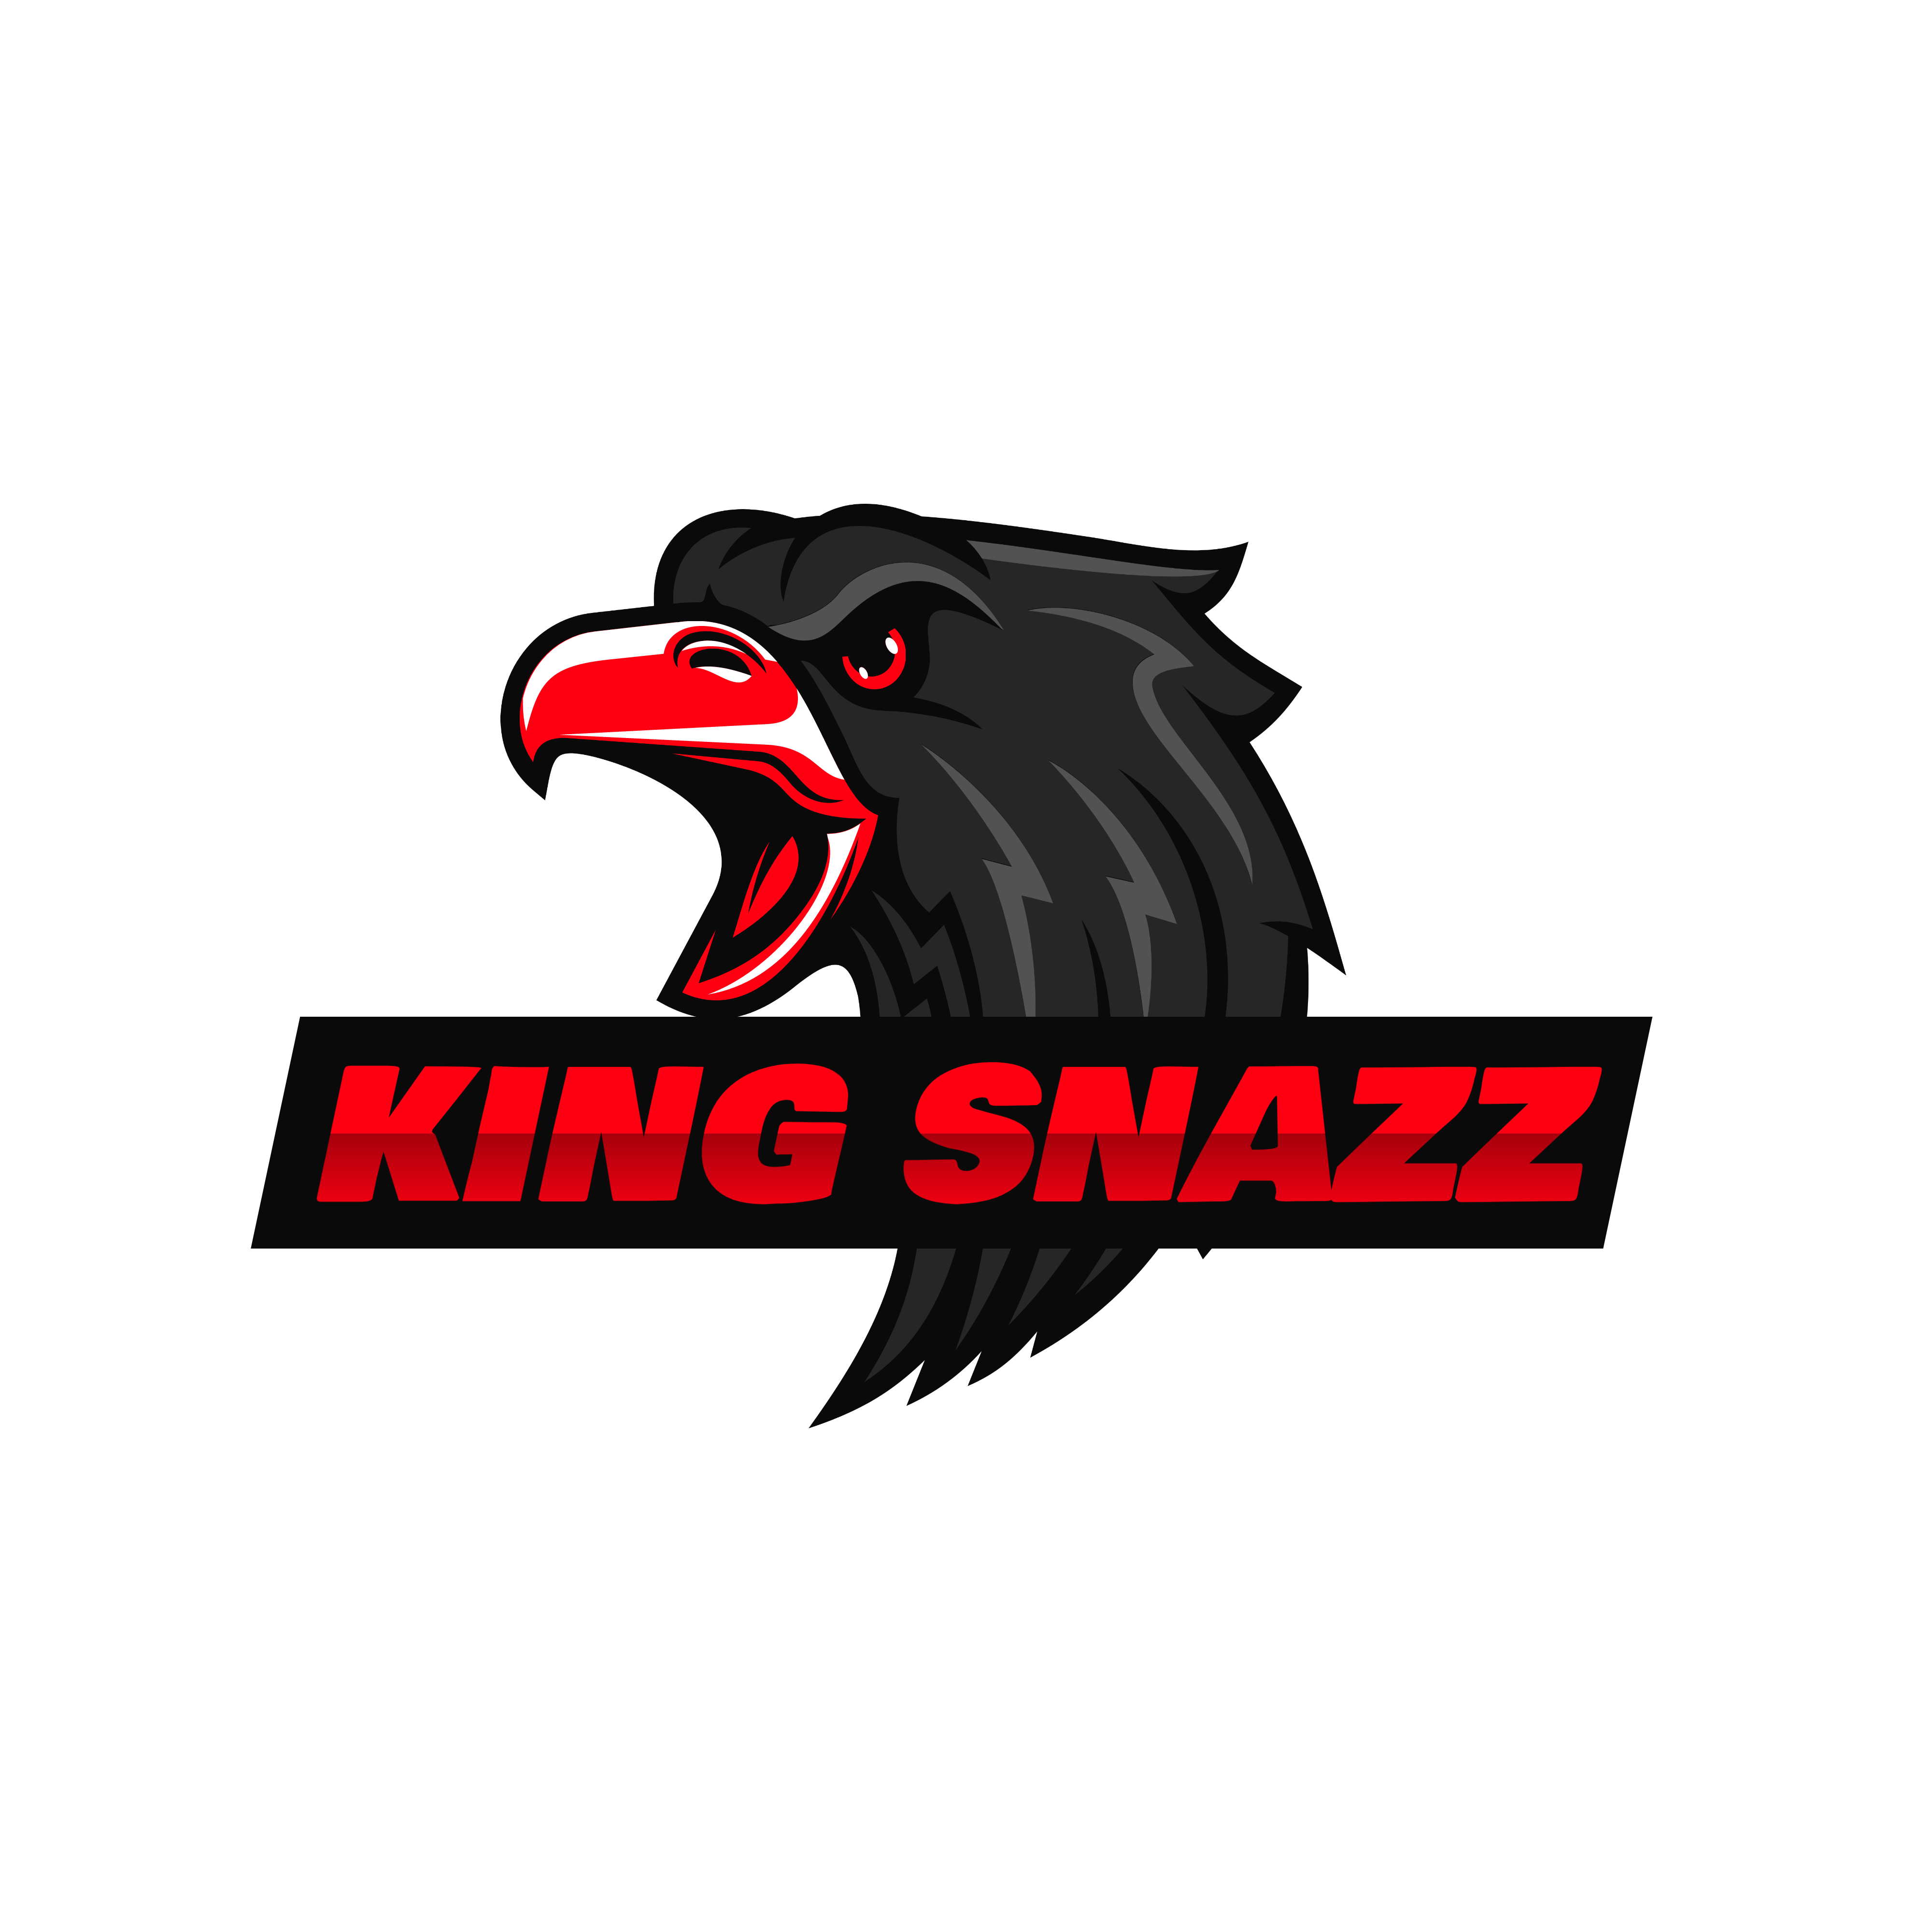 King Snazz